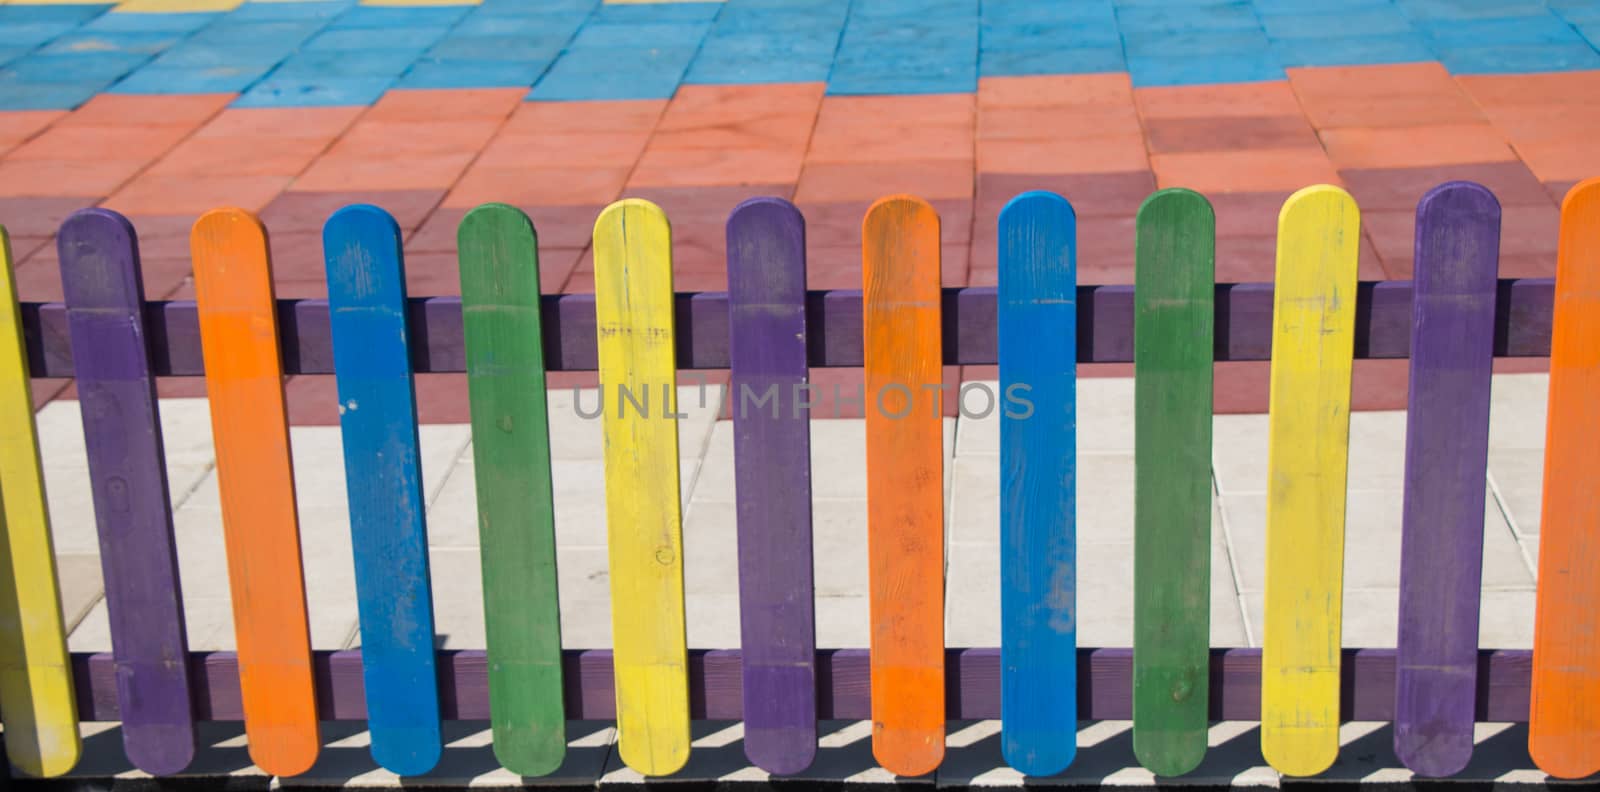 Close up of a part of decorative colorful wooden fence